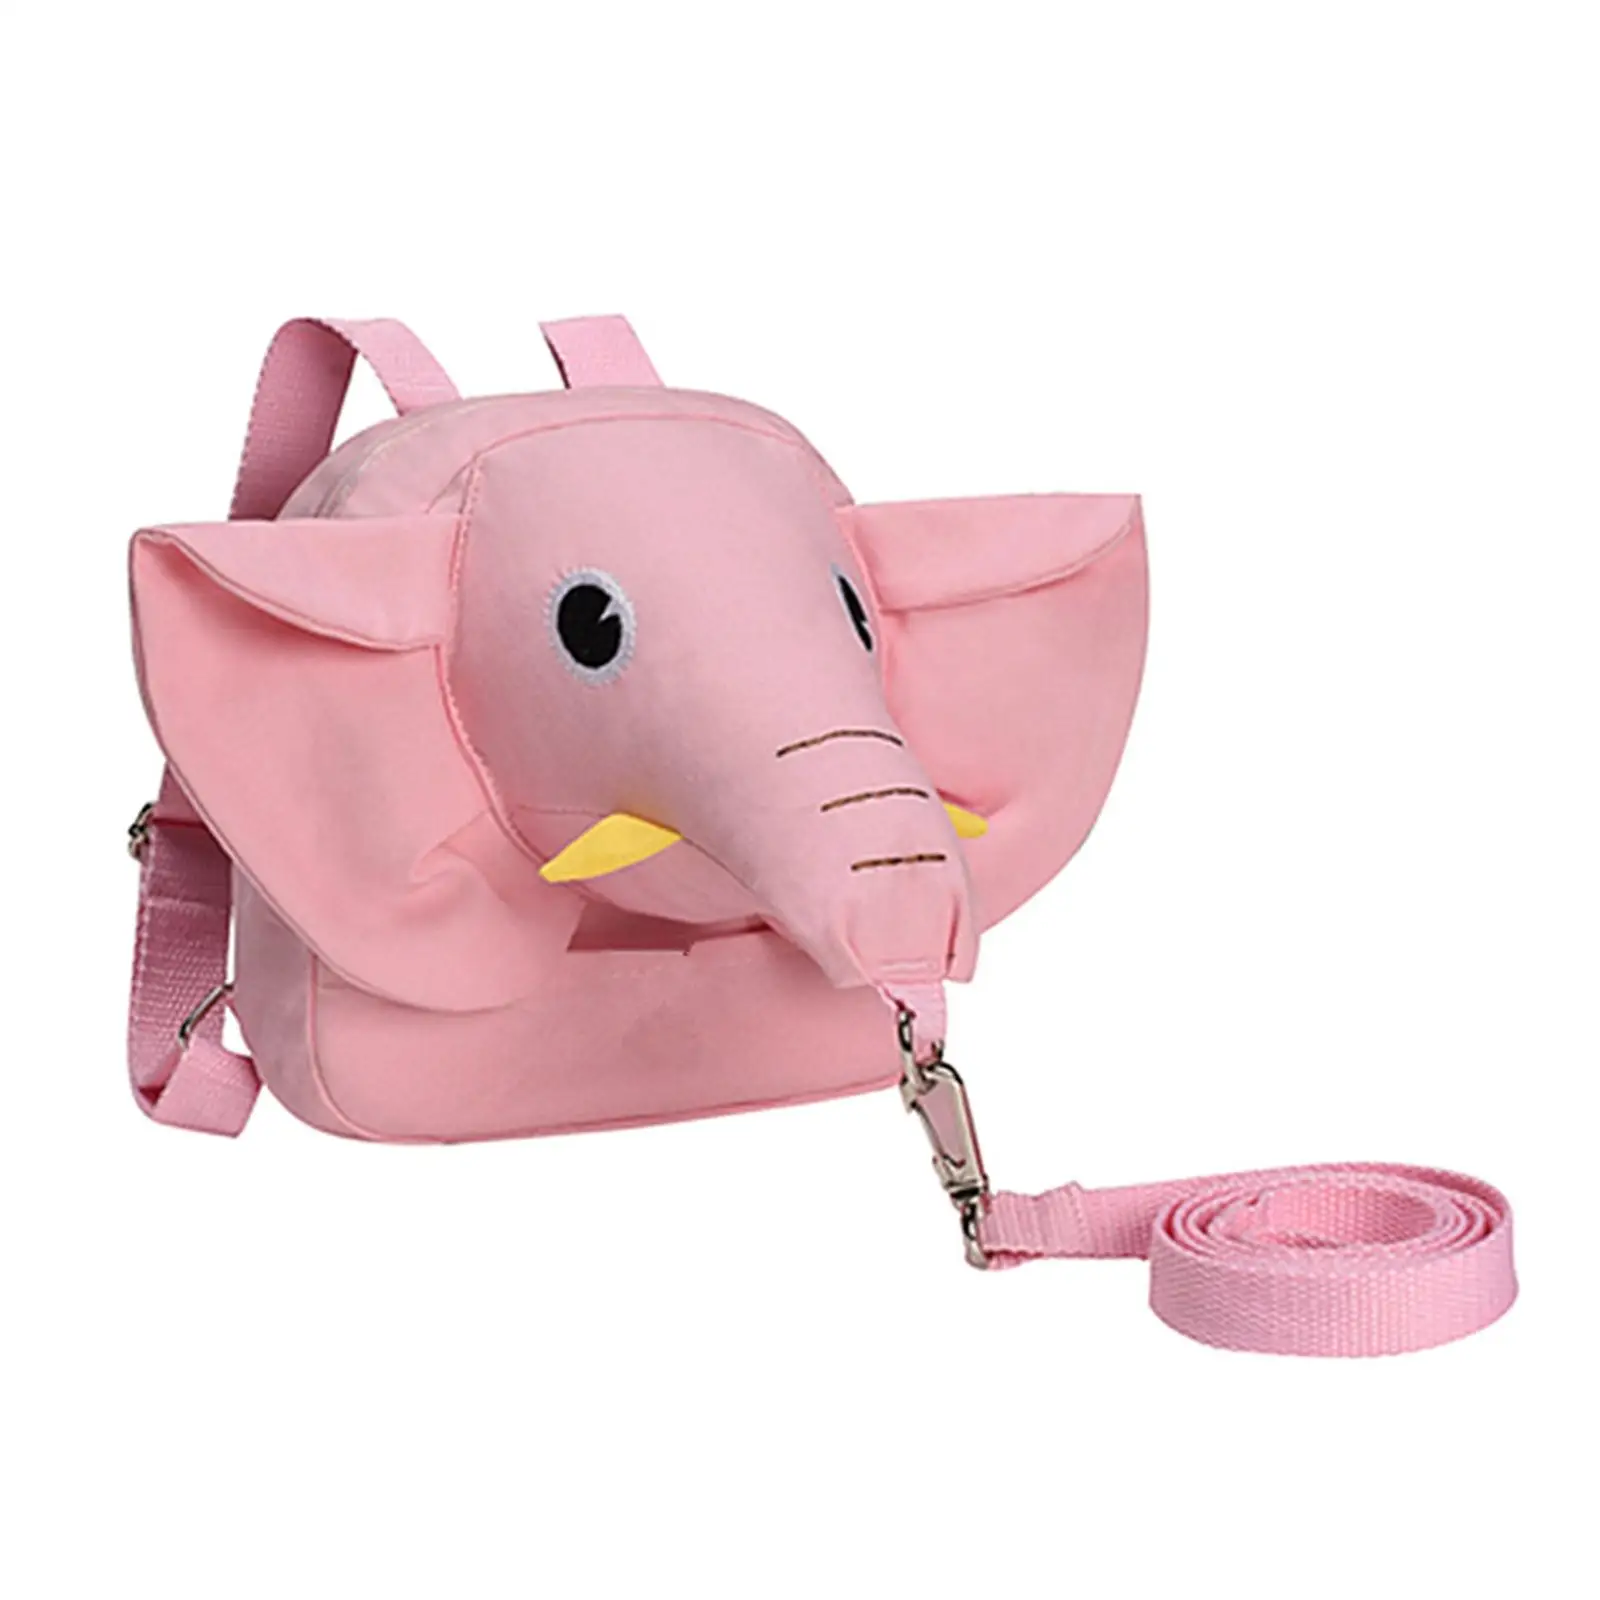 Toddler Backpack with Anti Lost Harness Cute Elephant Walking Belt Bag Baby Anti Lost Backpack Harness for Age 1-5 Years Old